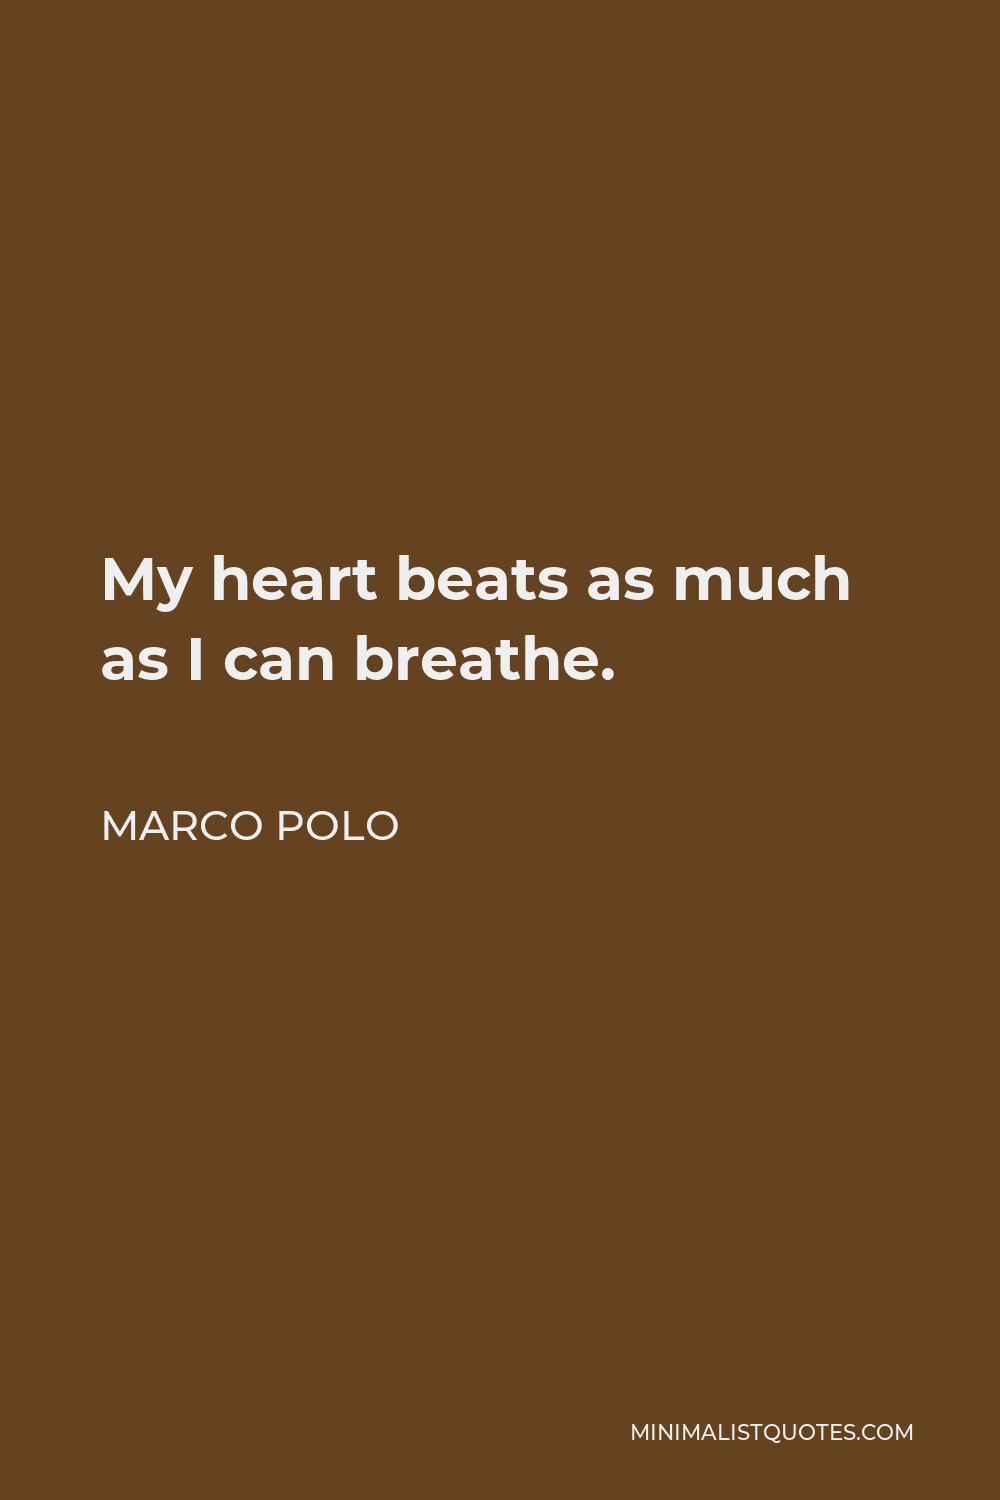 Marco Polo Quote - My heart beats as much as I can breathe.